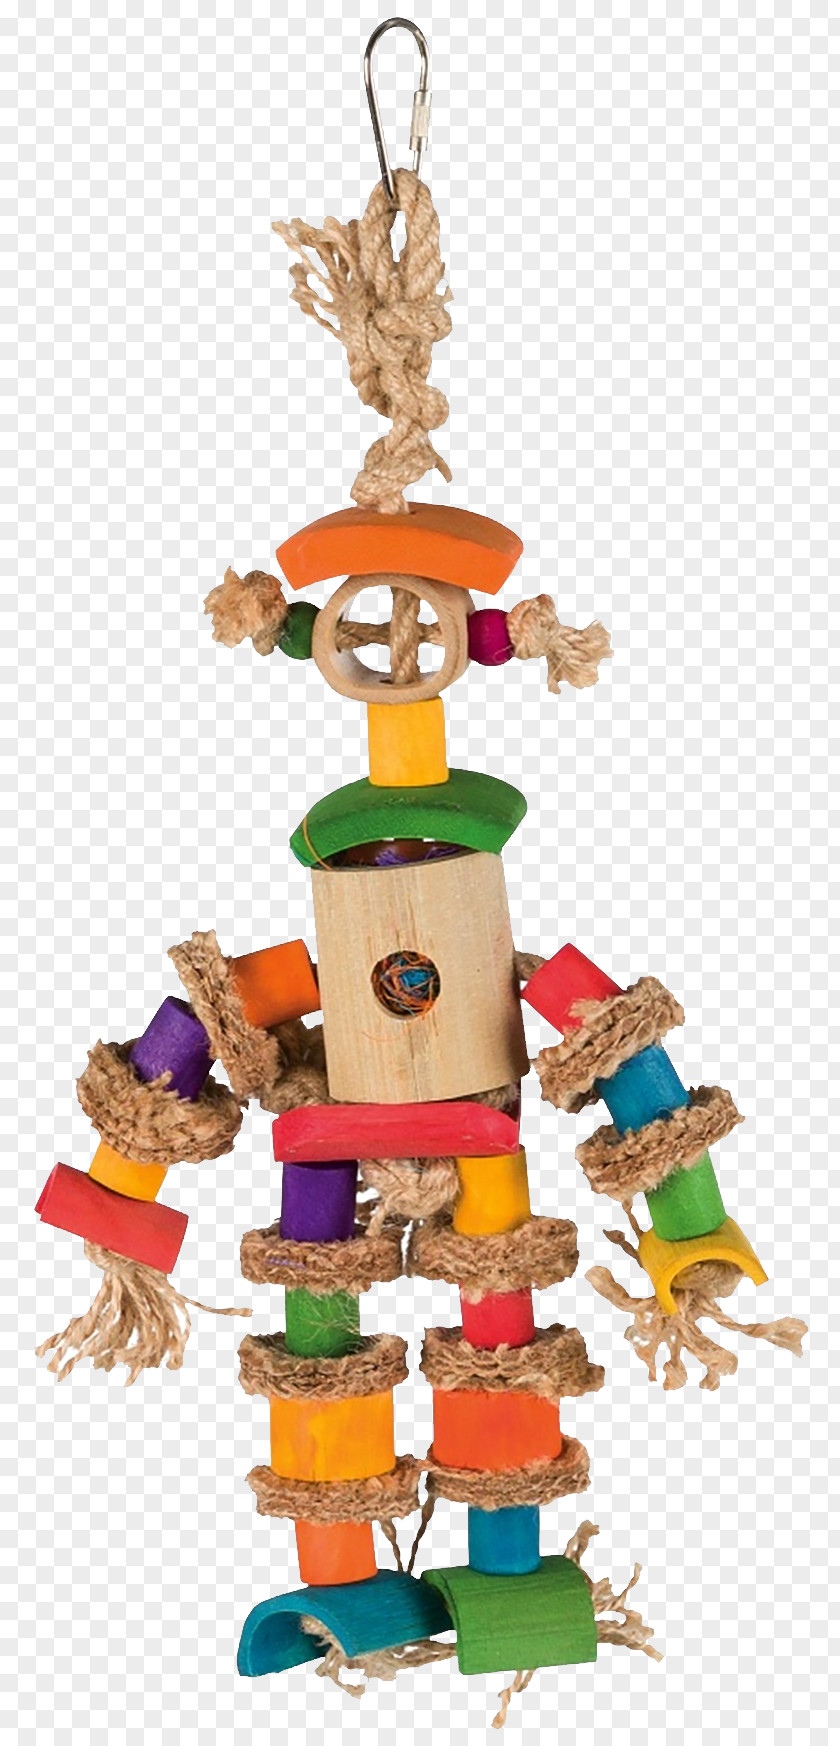 Rope Wood Toy Jute Cord PNG